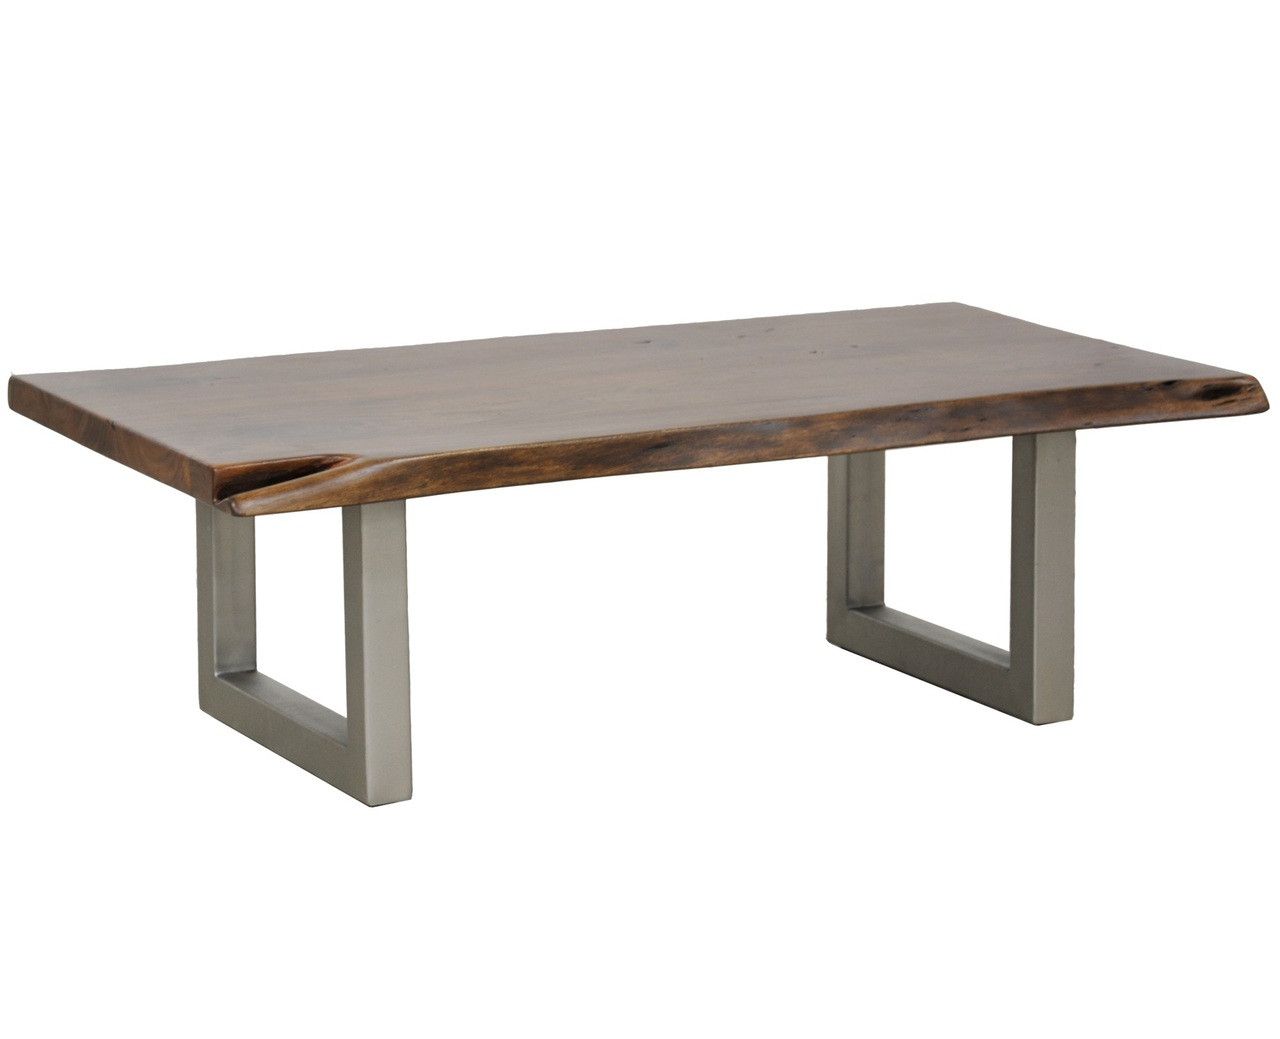 Montana Solid Wood Metal Leg Coffee Table | Zin Home Pertaining To Coffee Tables With Metal Legs (View 11 of 15)